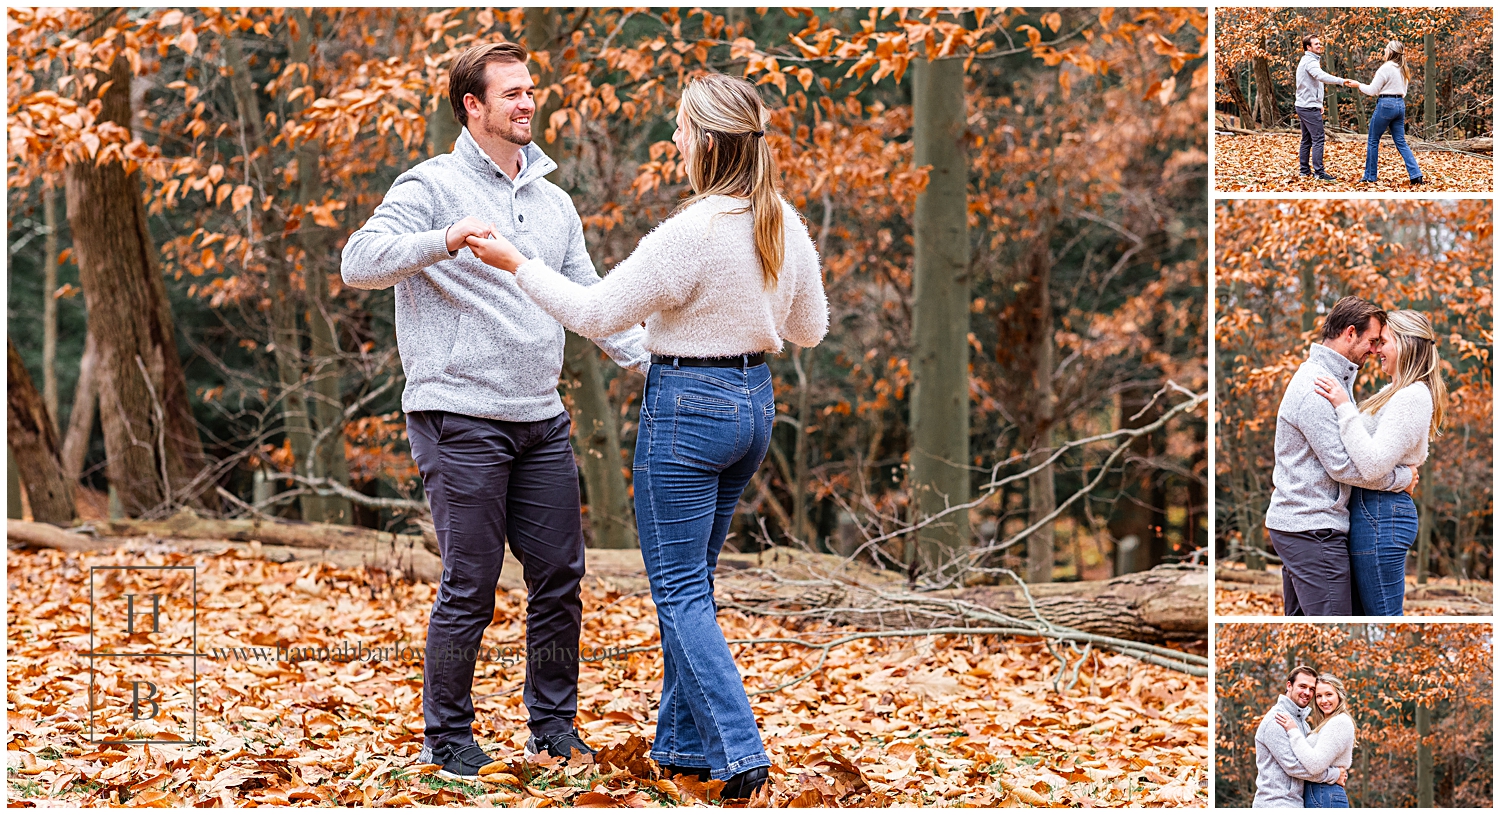 Man and woman dance in leaves for engagement photos